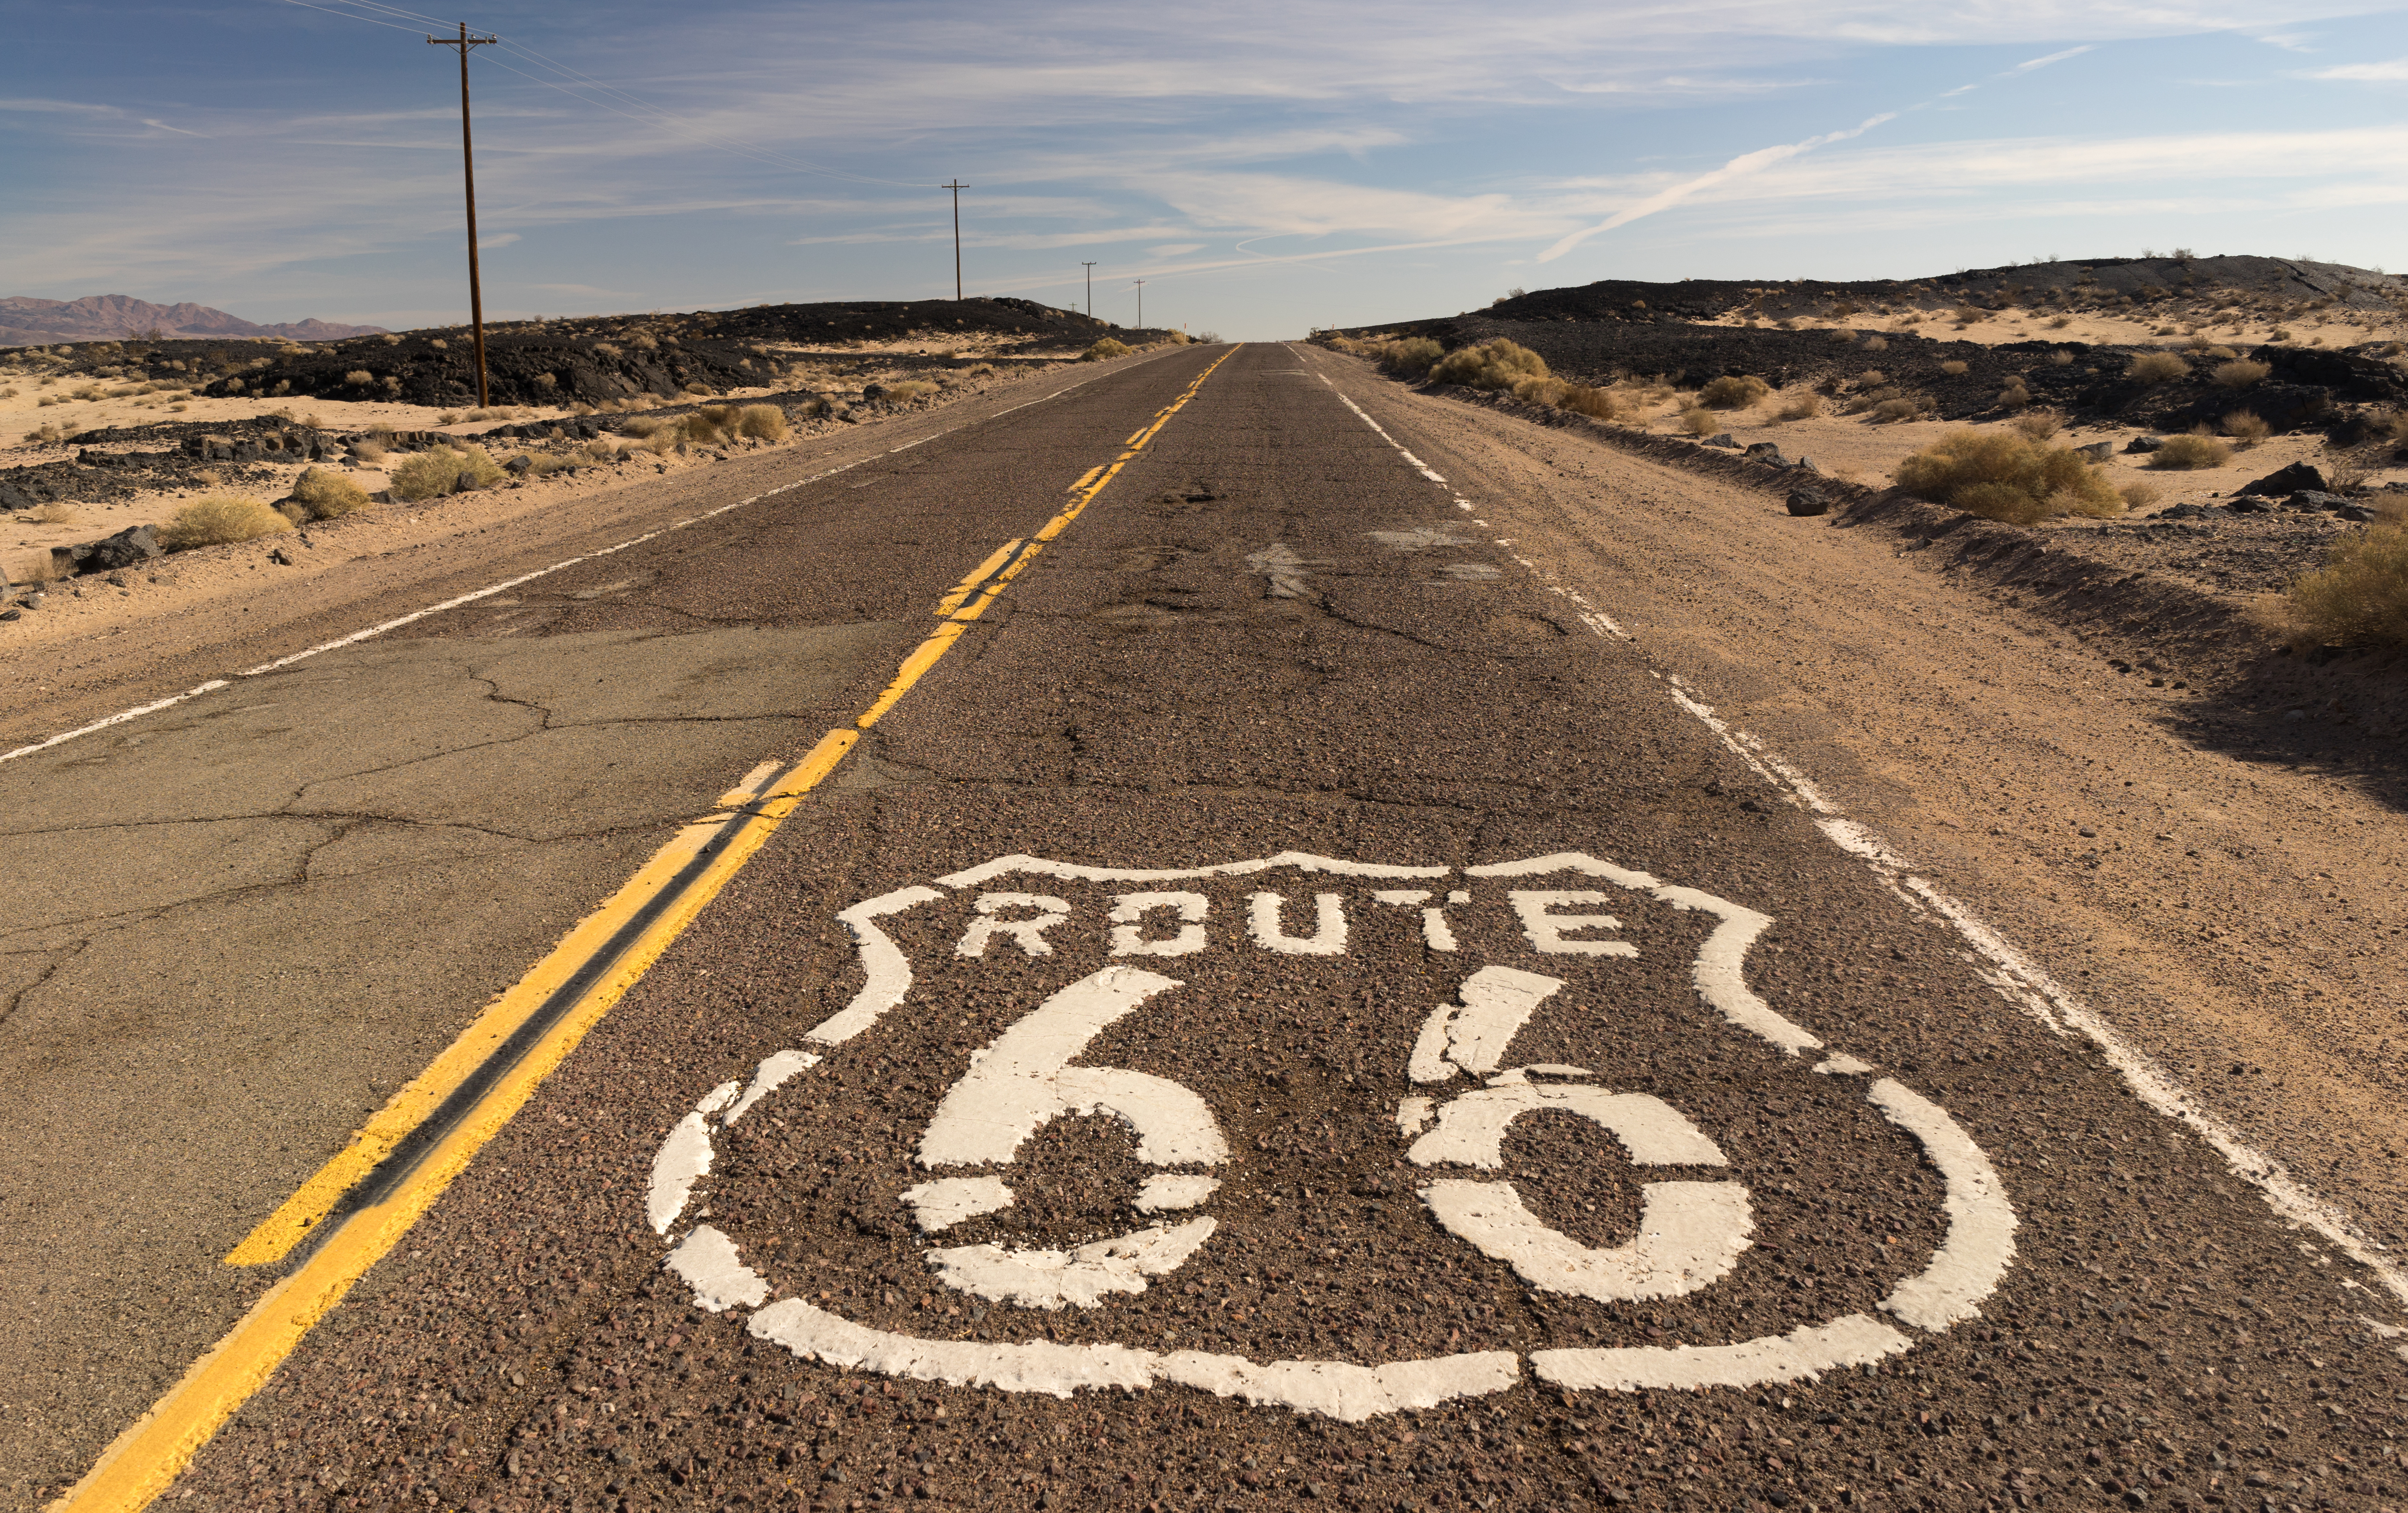 Route 66: The Mother Road